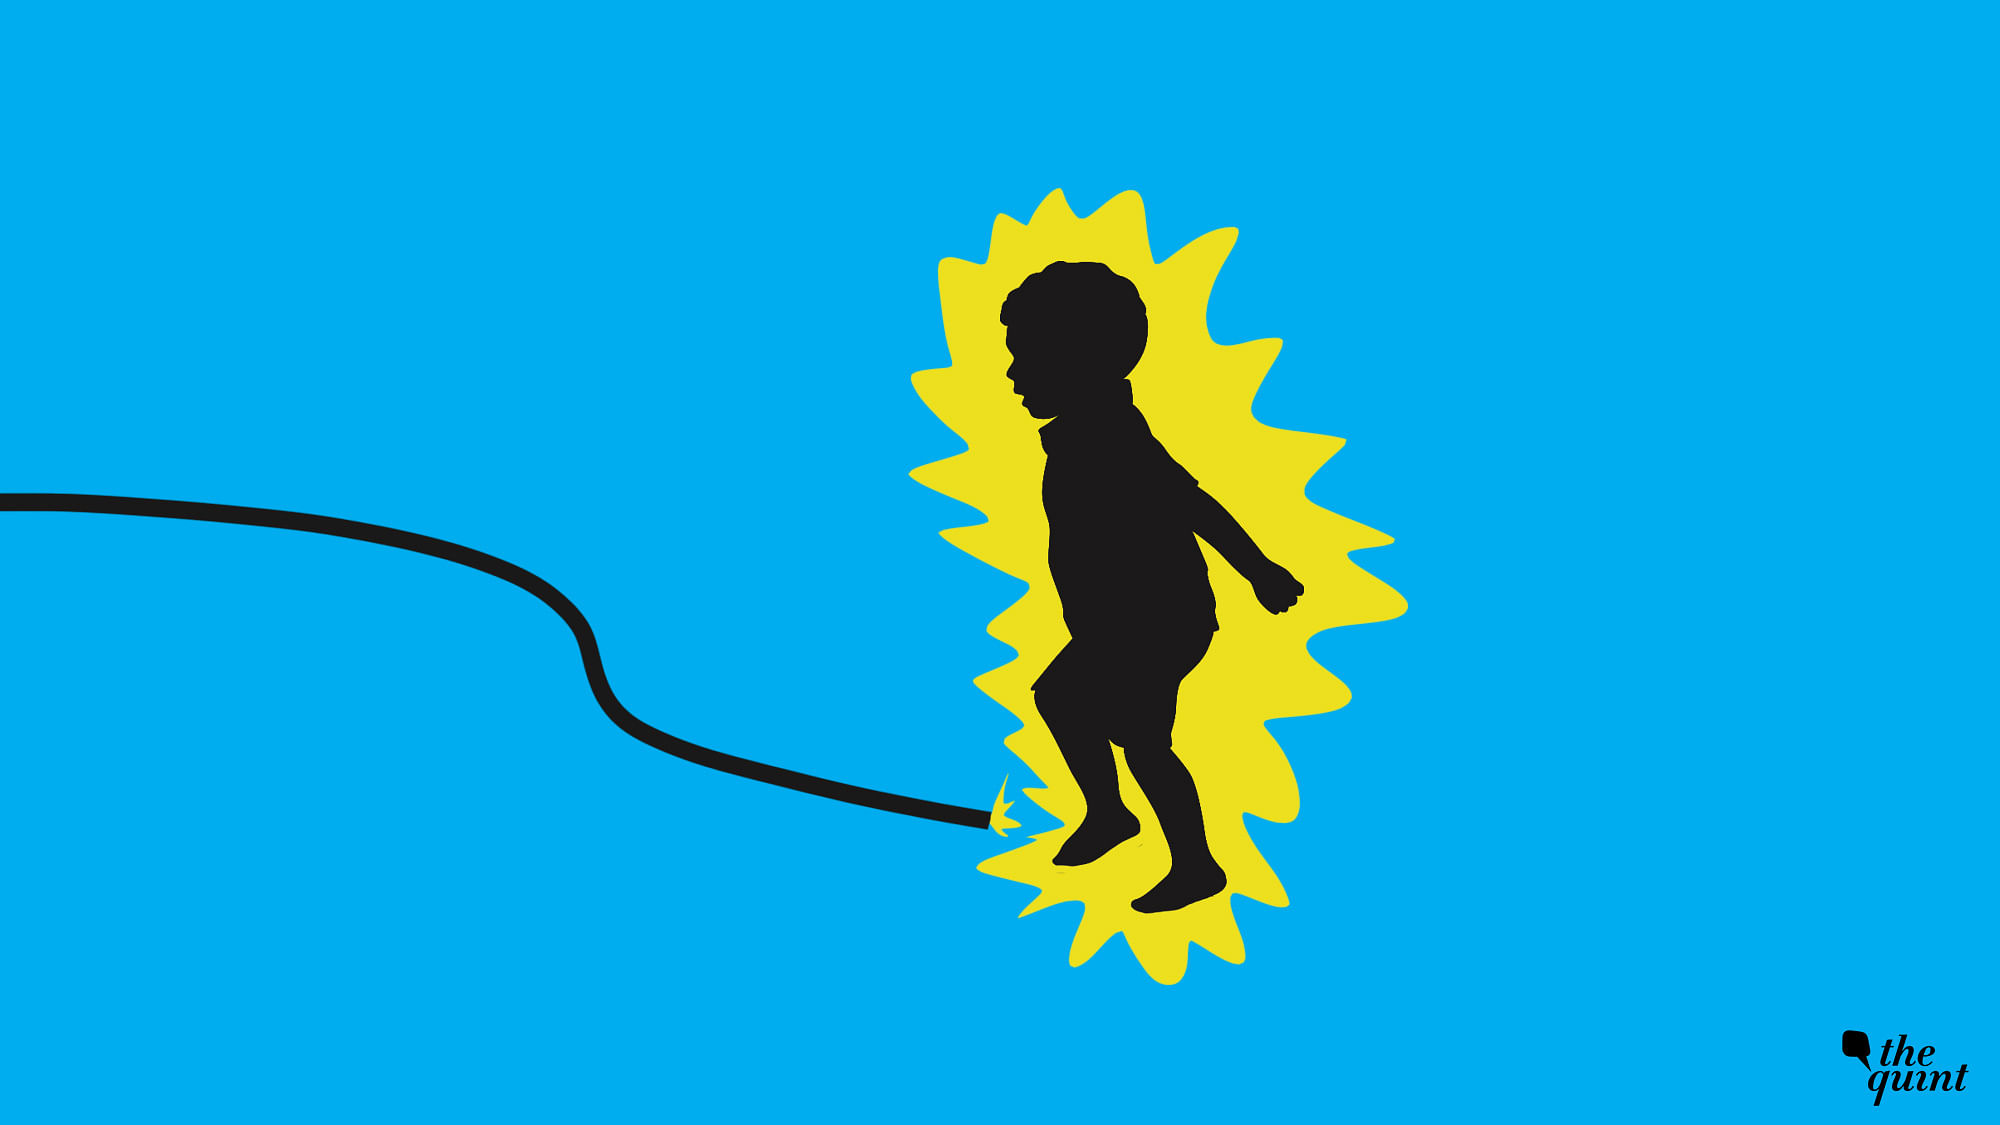 Seven-year-old Uday was electrocuted after he came into contact with a live wire at a BBMP park in Bengaluru on 24 February. The FIR has been filed against unnamed agency officials.&nbsp;